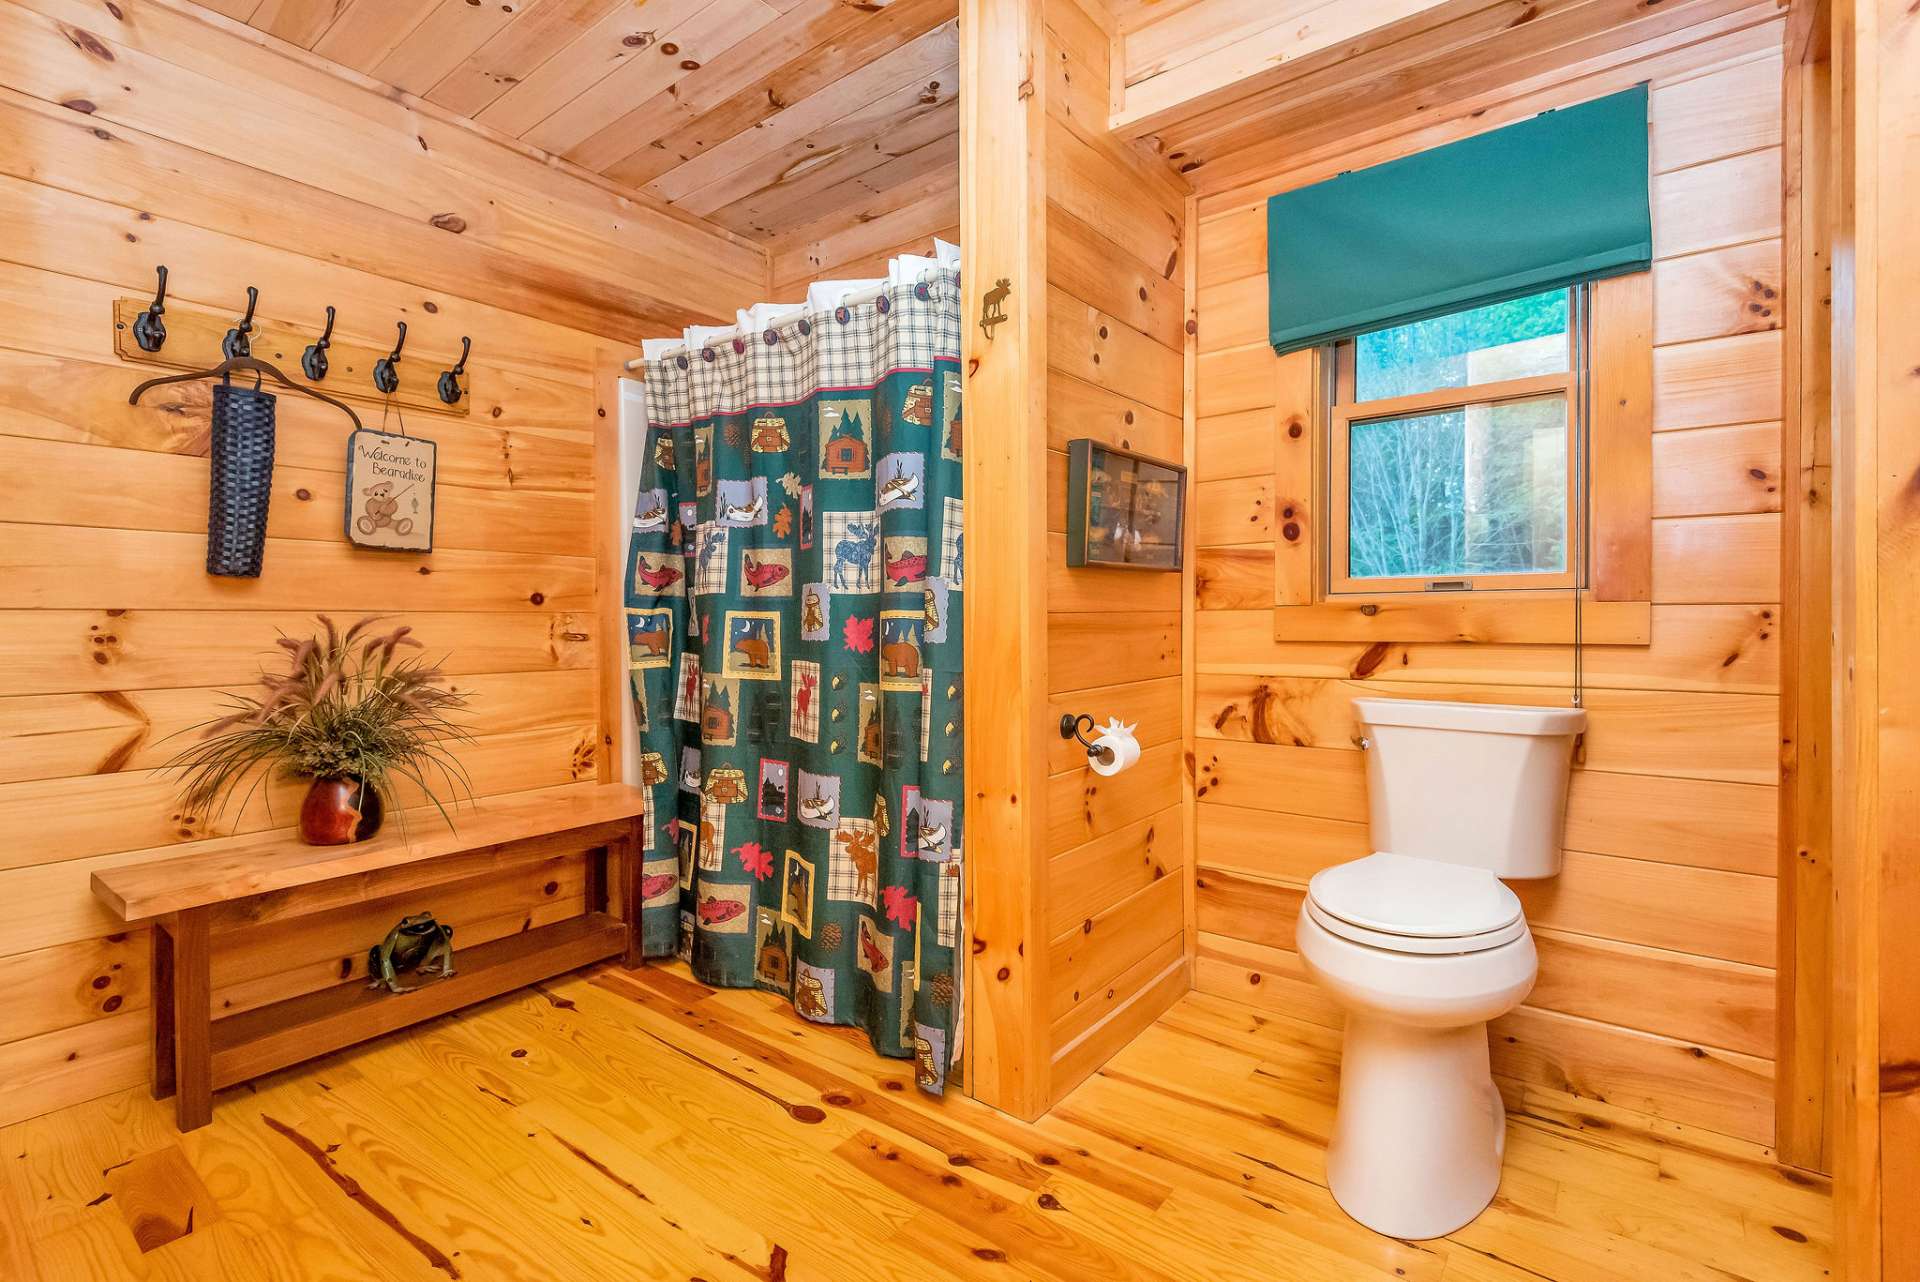 The main level bathroom completes the convenience of one-level living in this home, providing accessibility and comfort without the need to navigate stairs.